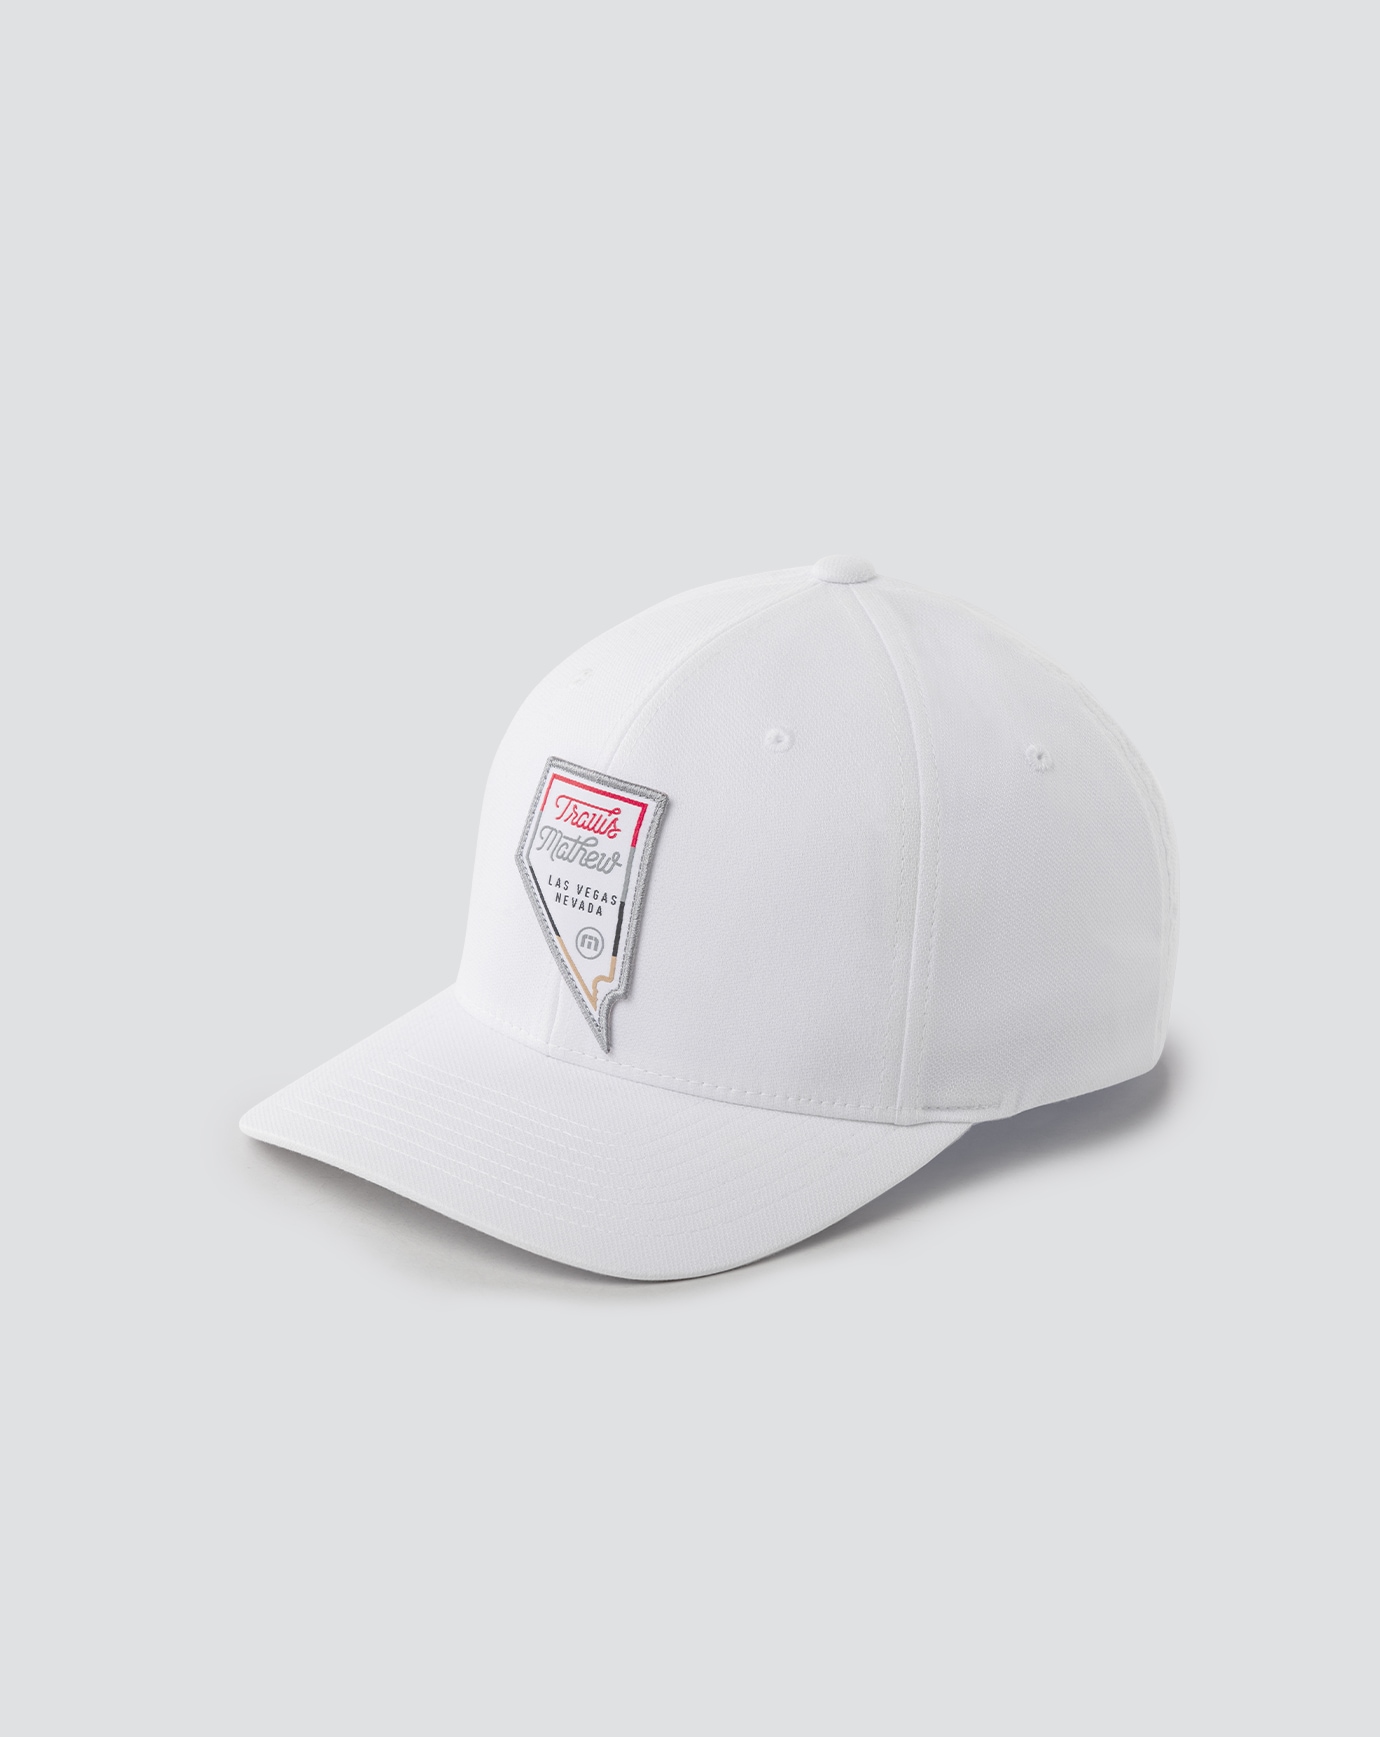 INTERSTATE 15 FITTED HAT Image Thumbnail 2